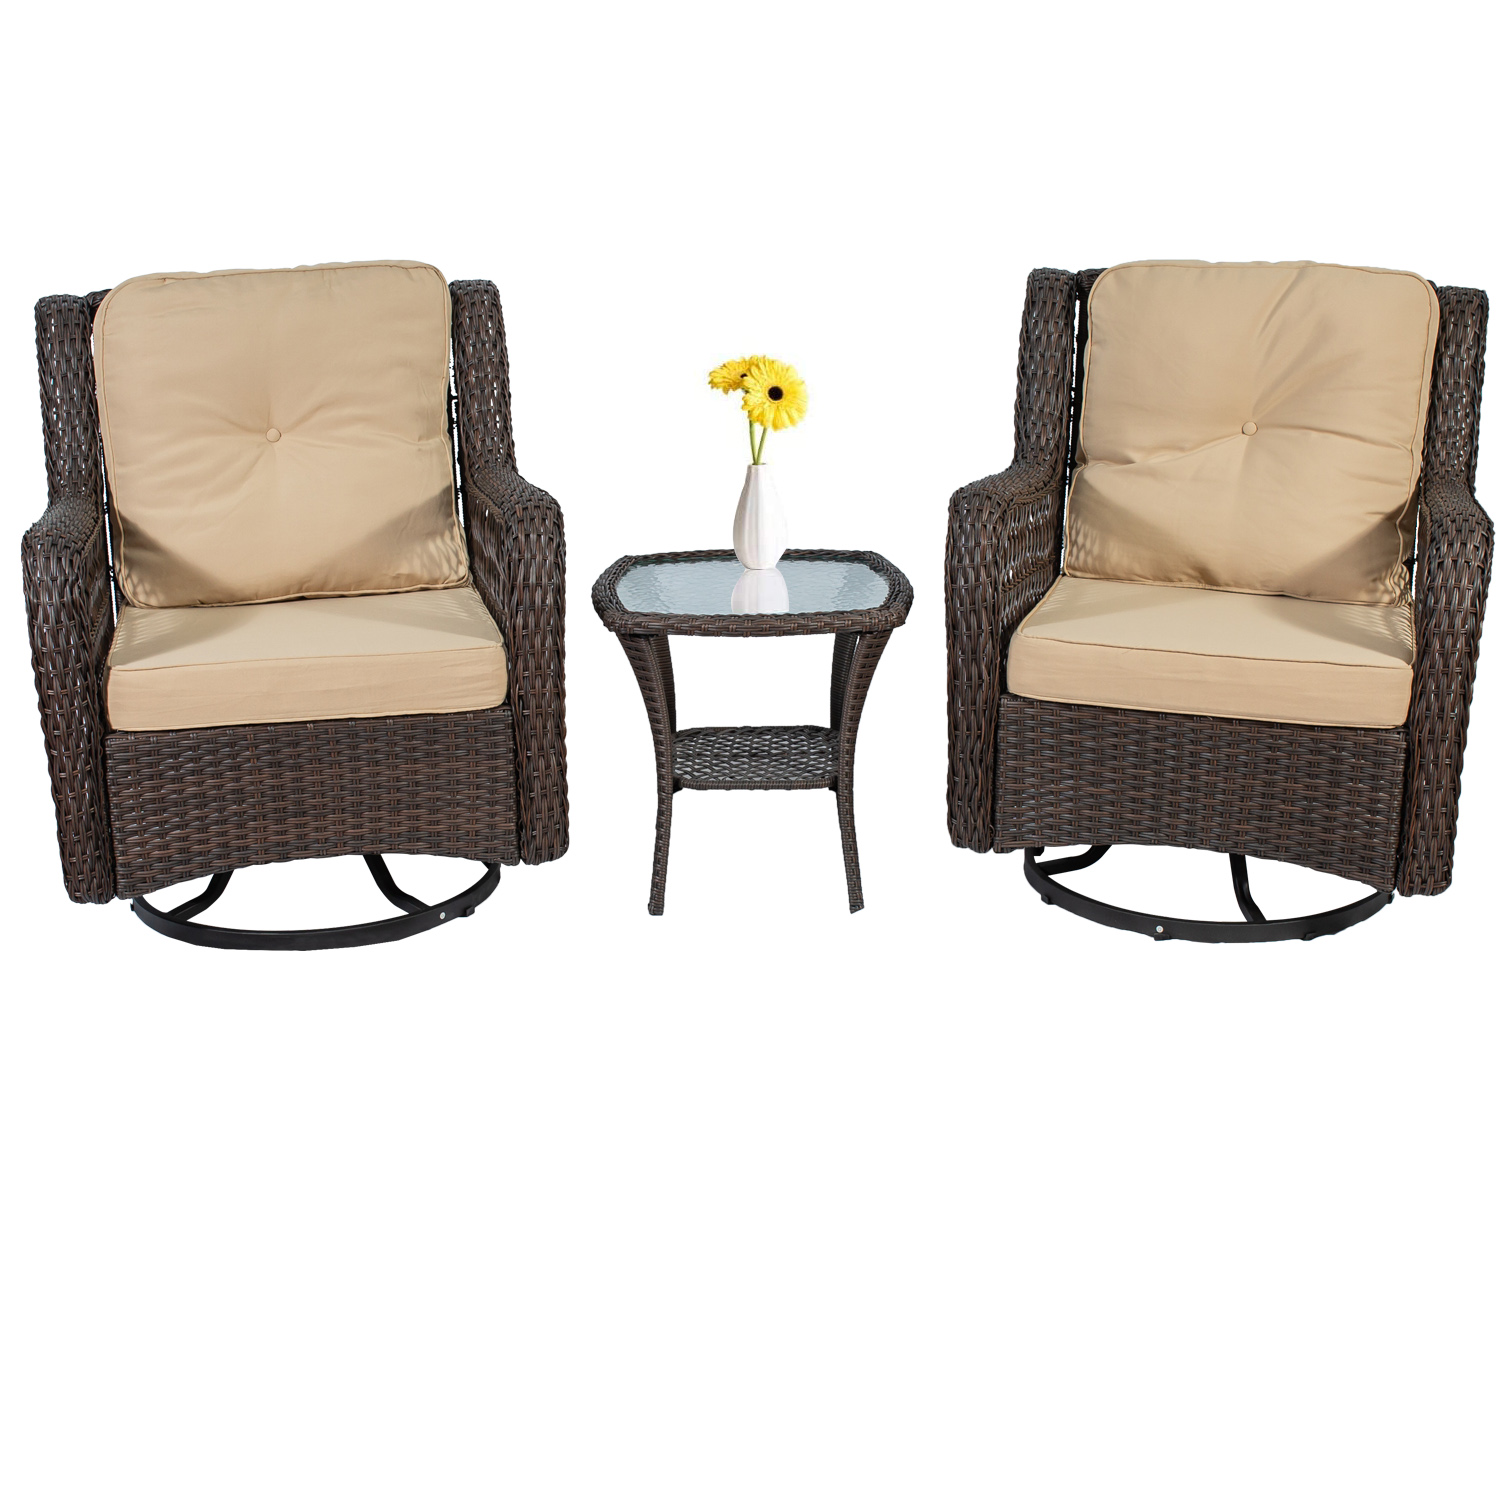 Outdoor Swivel Patio Lounge Chairs 3-Piece Patio Conversation Bistro Set w/Wicker Patio Chairs and Side Table for Small Space Deck Porch 350 LBS Beige - image 5 of 13